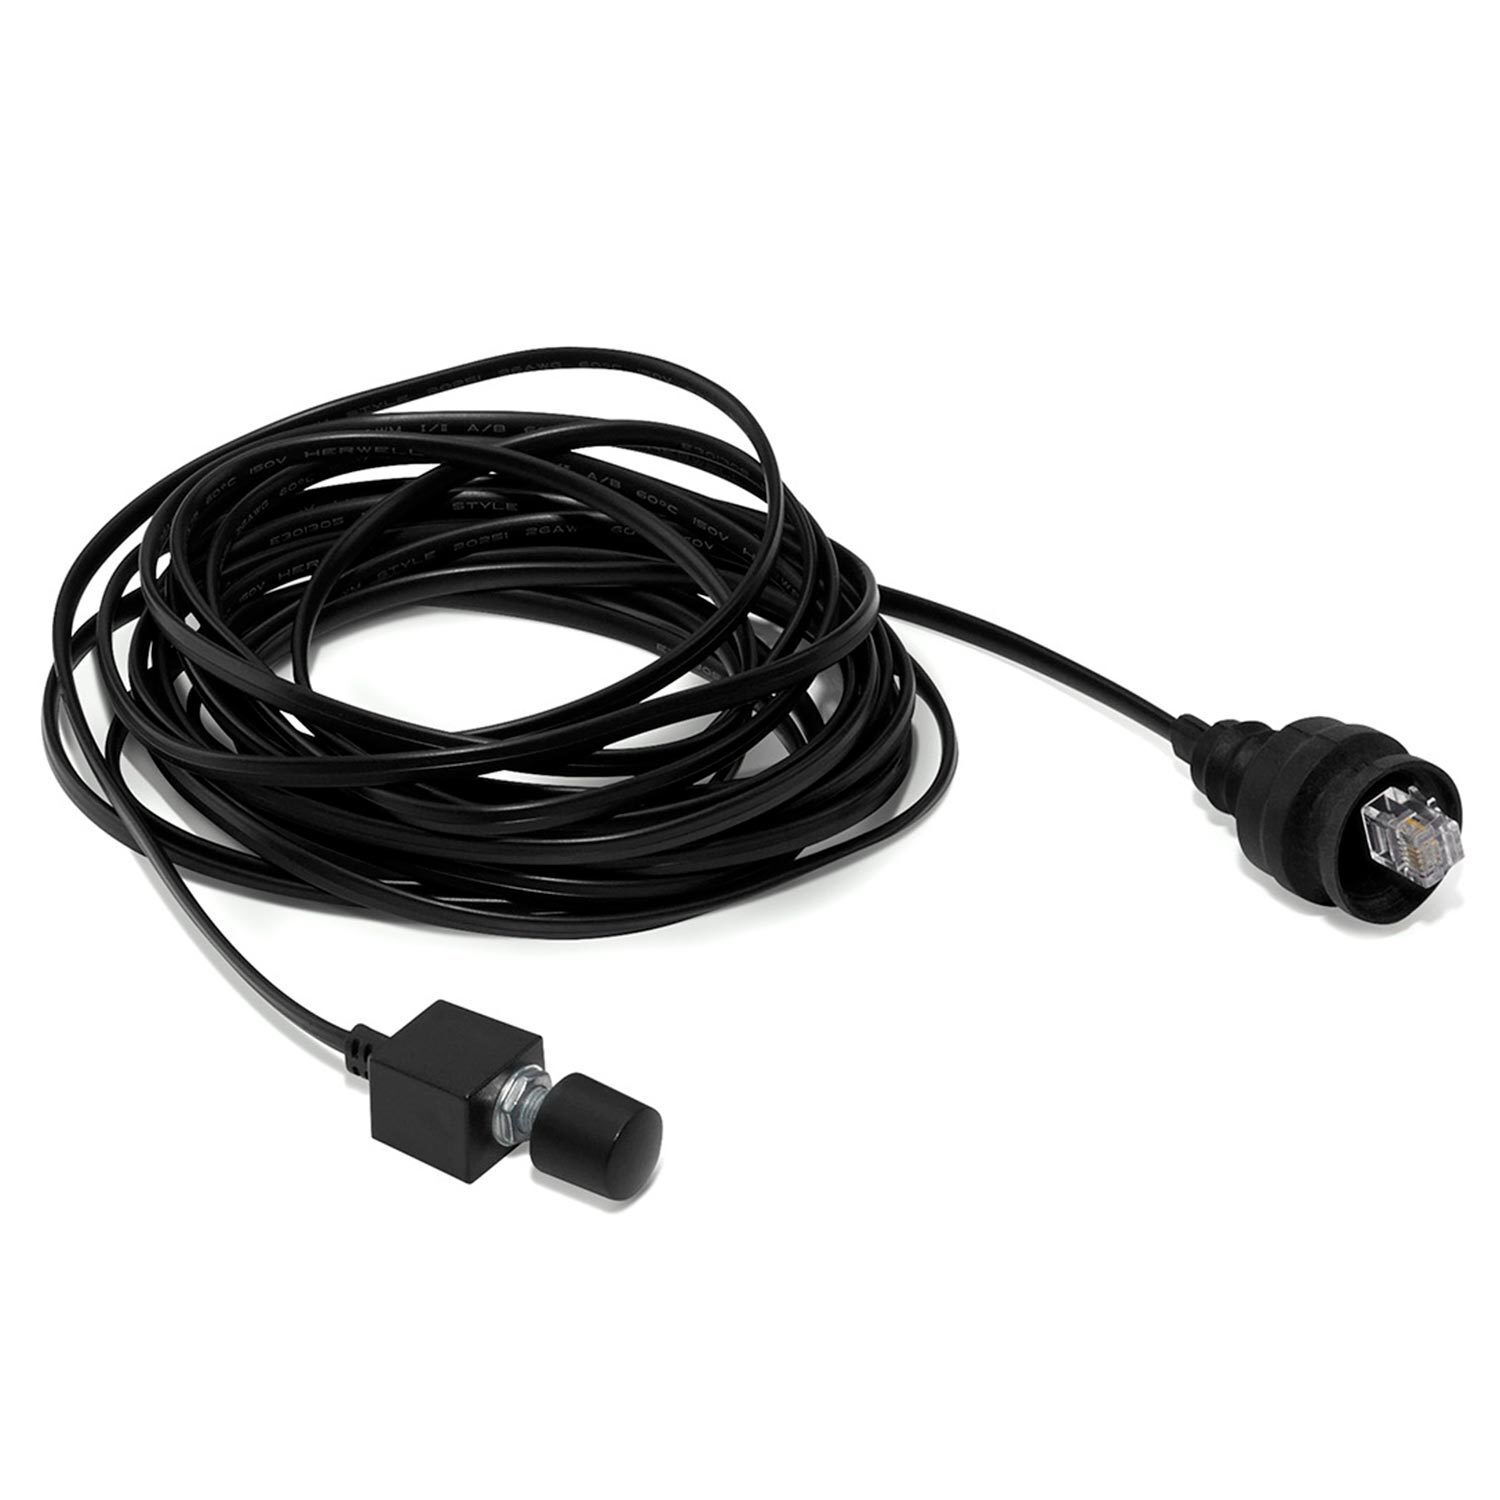 JL Audio M-RBC-1 Rated Water-Resistant Remote Bass Knob Control with Cable 